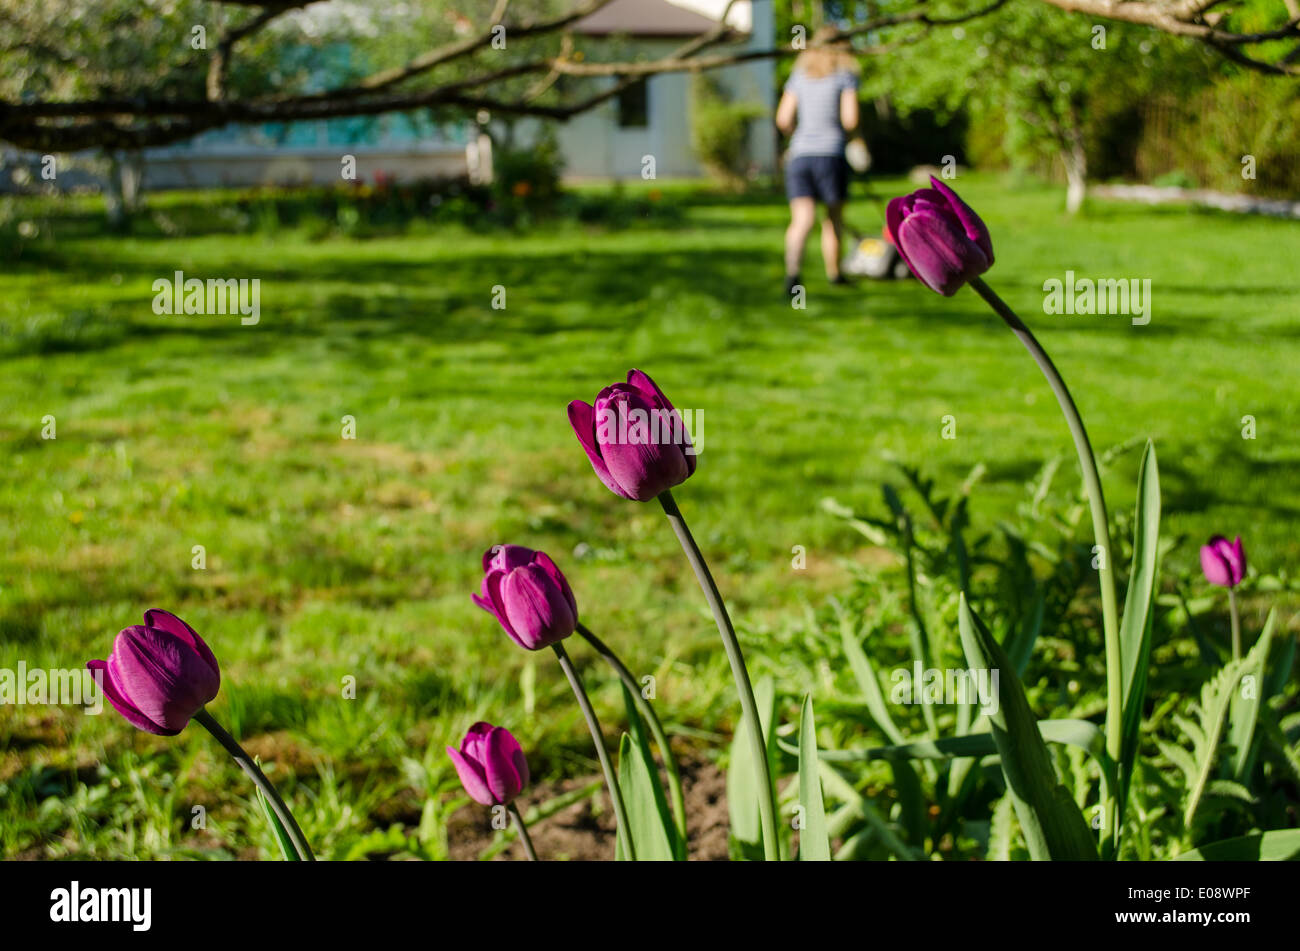 close up of dark pink garden tulip and woman silhouette cutting grass mower Stock Photo